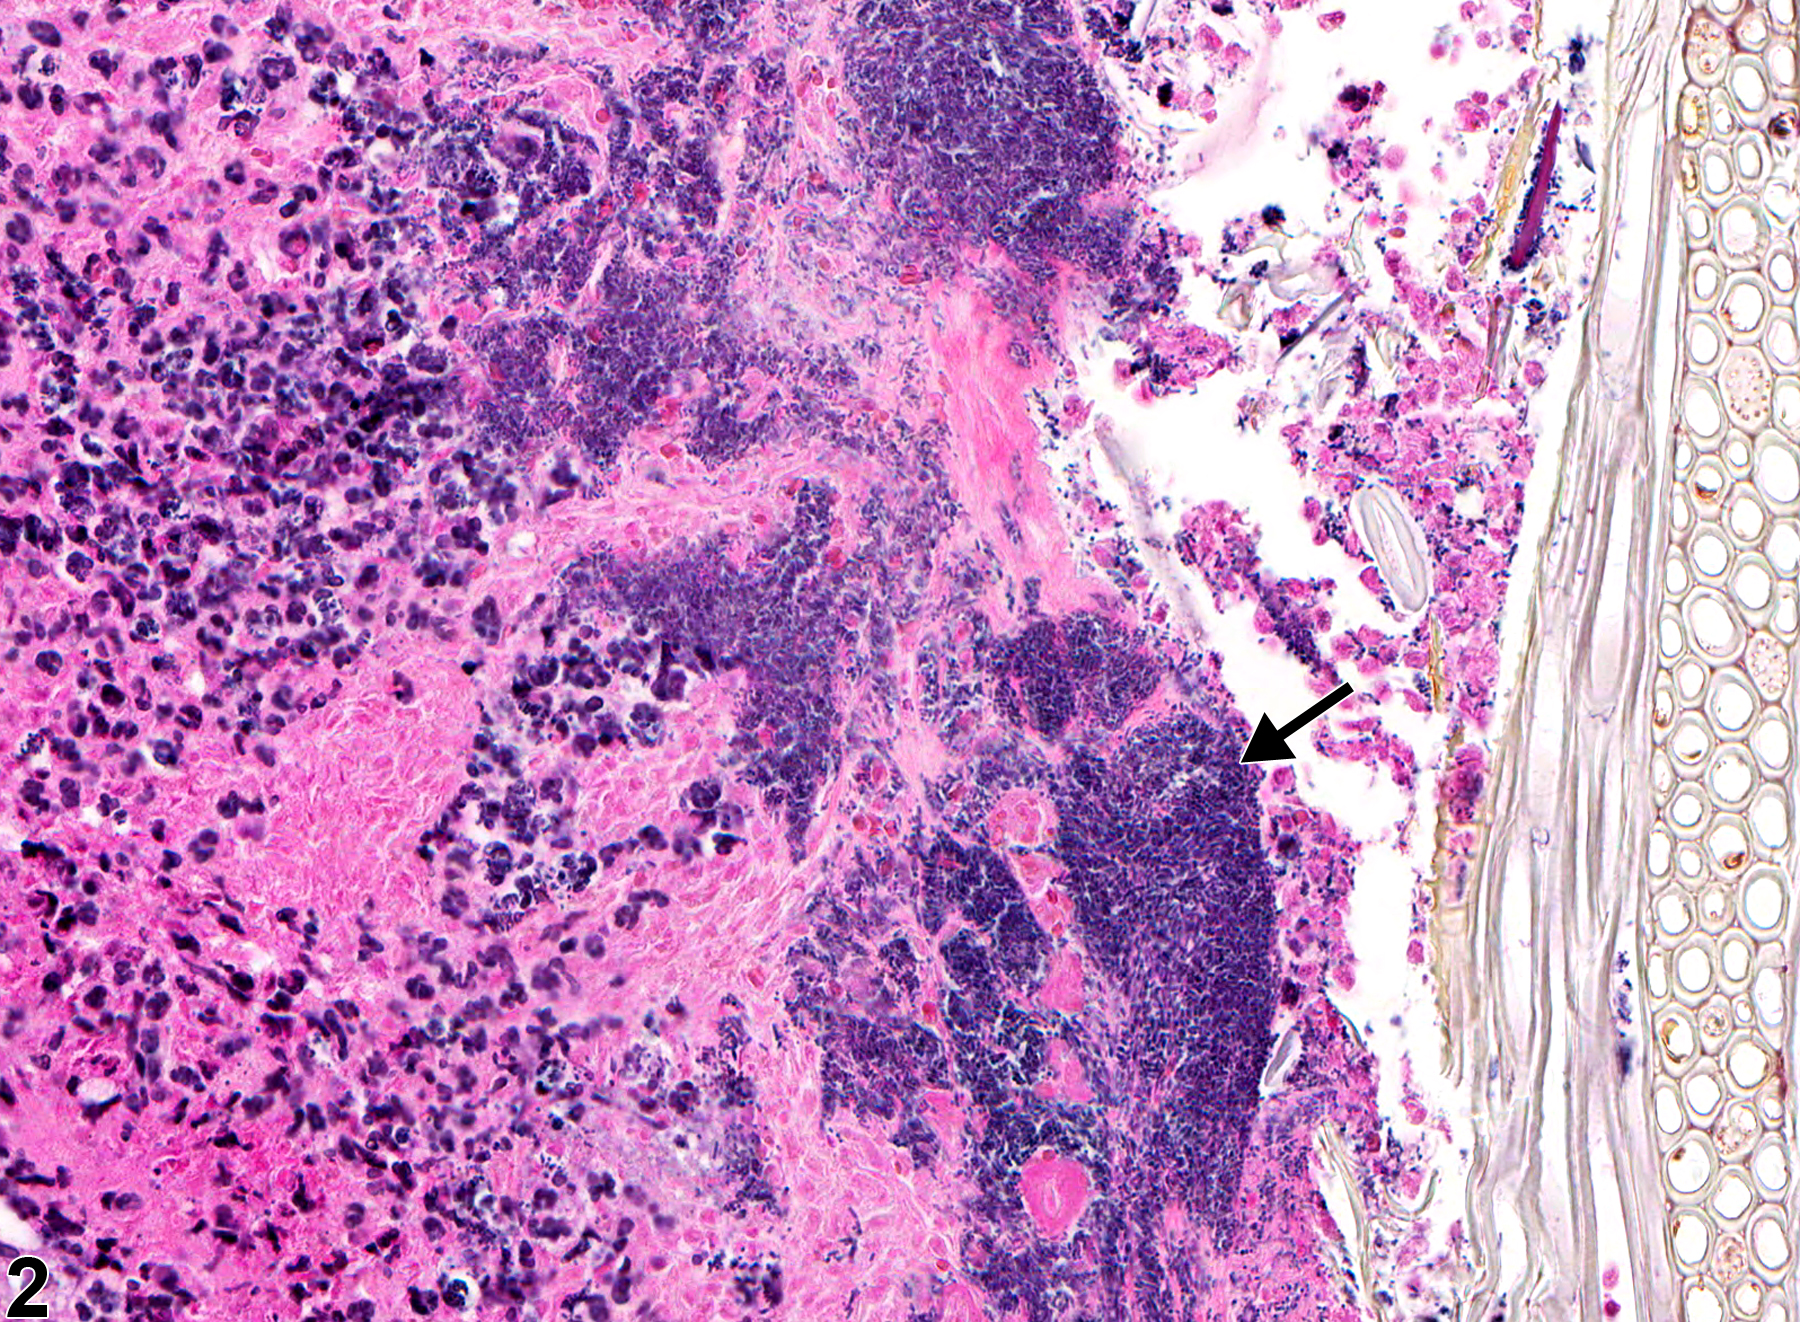 Image of inflammation in the esophagus from a female F344/N rat in a subchronic study